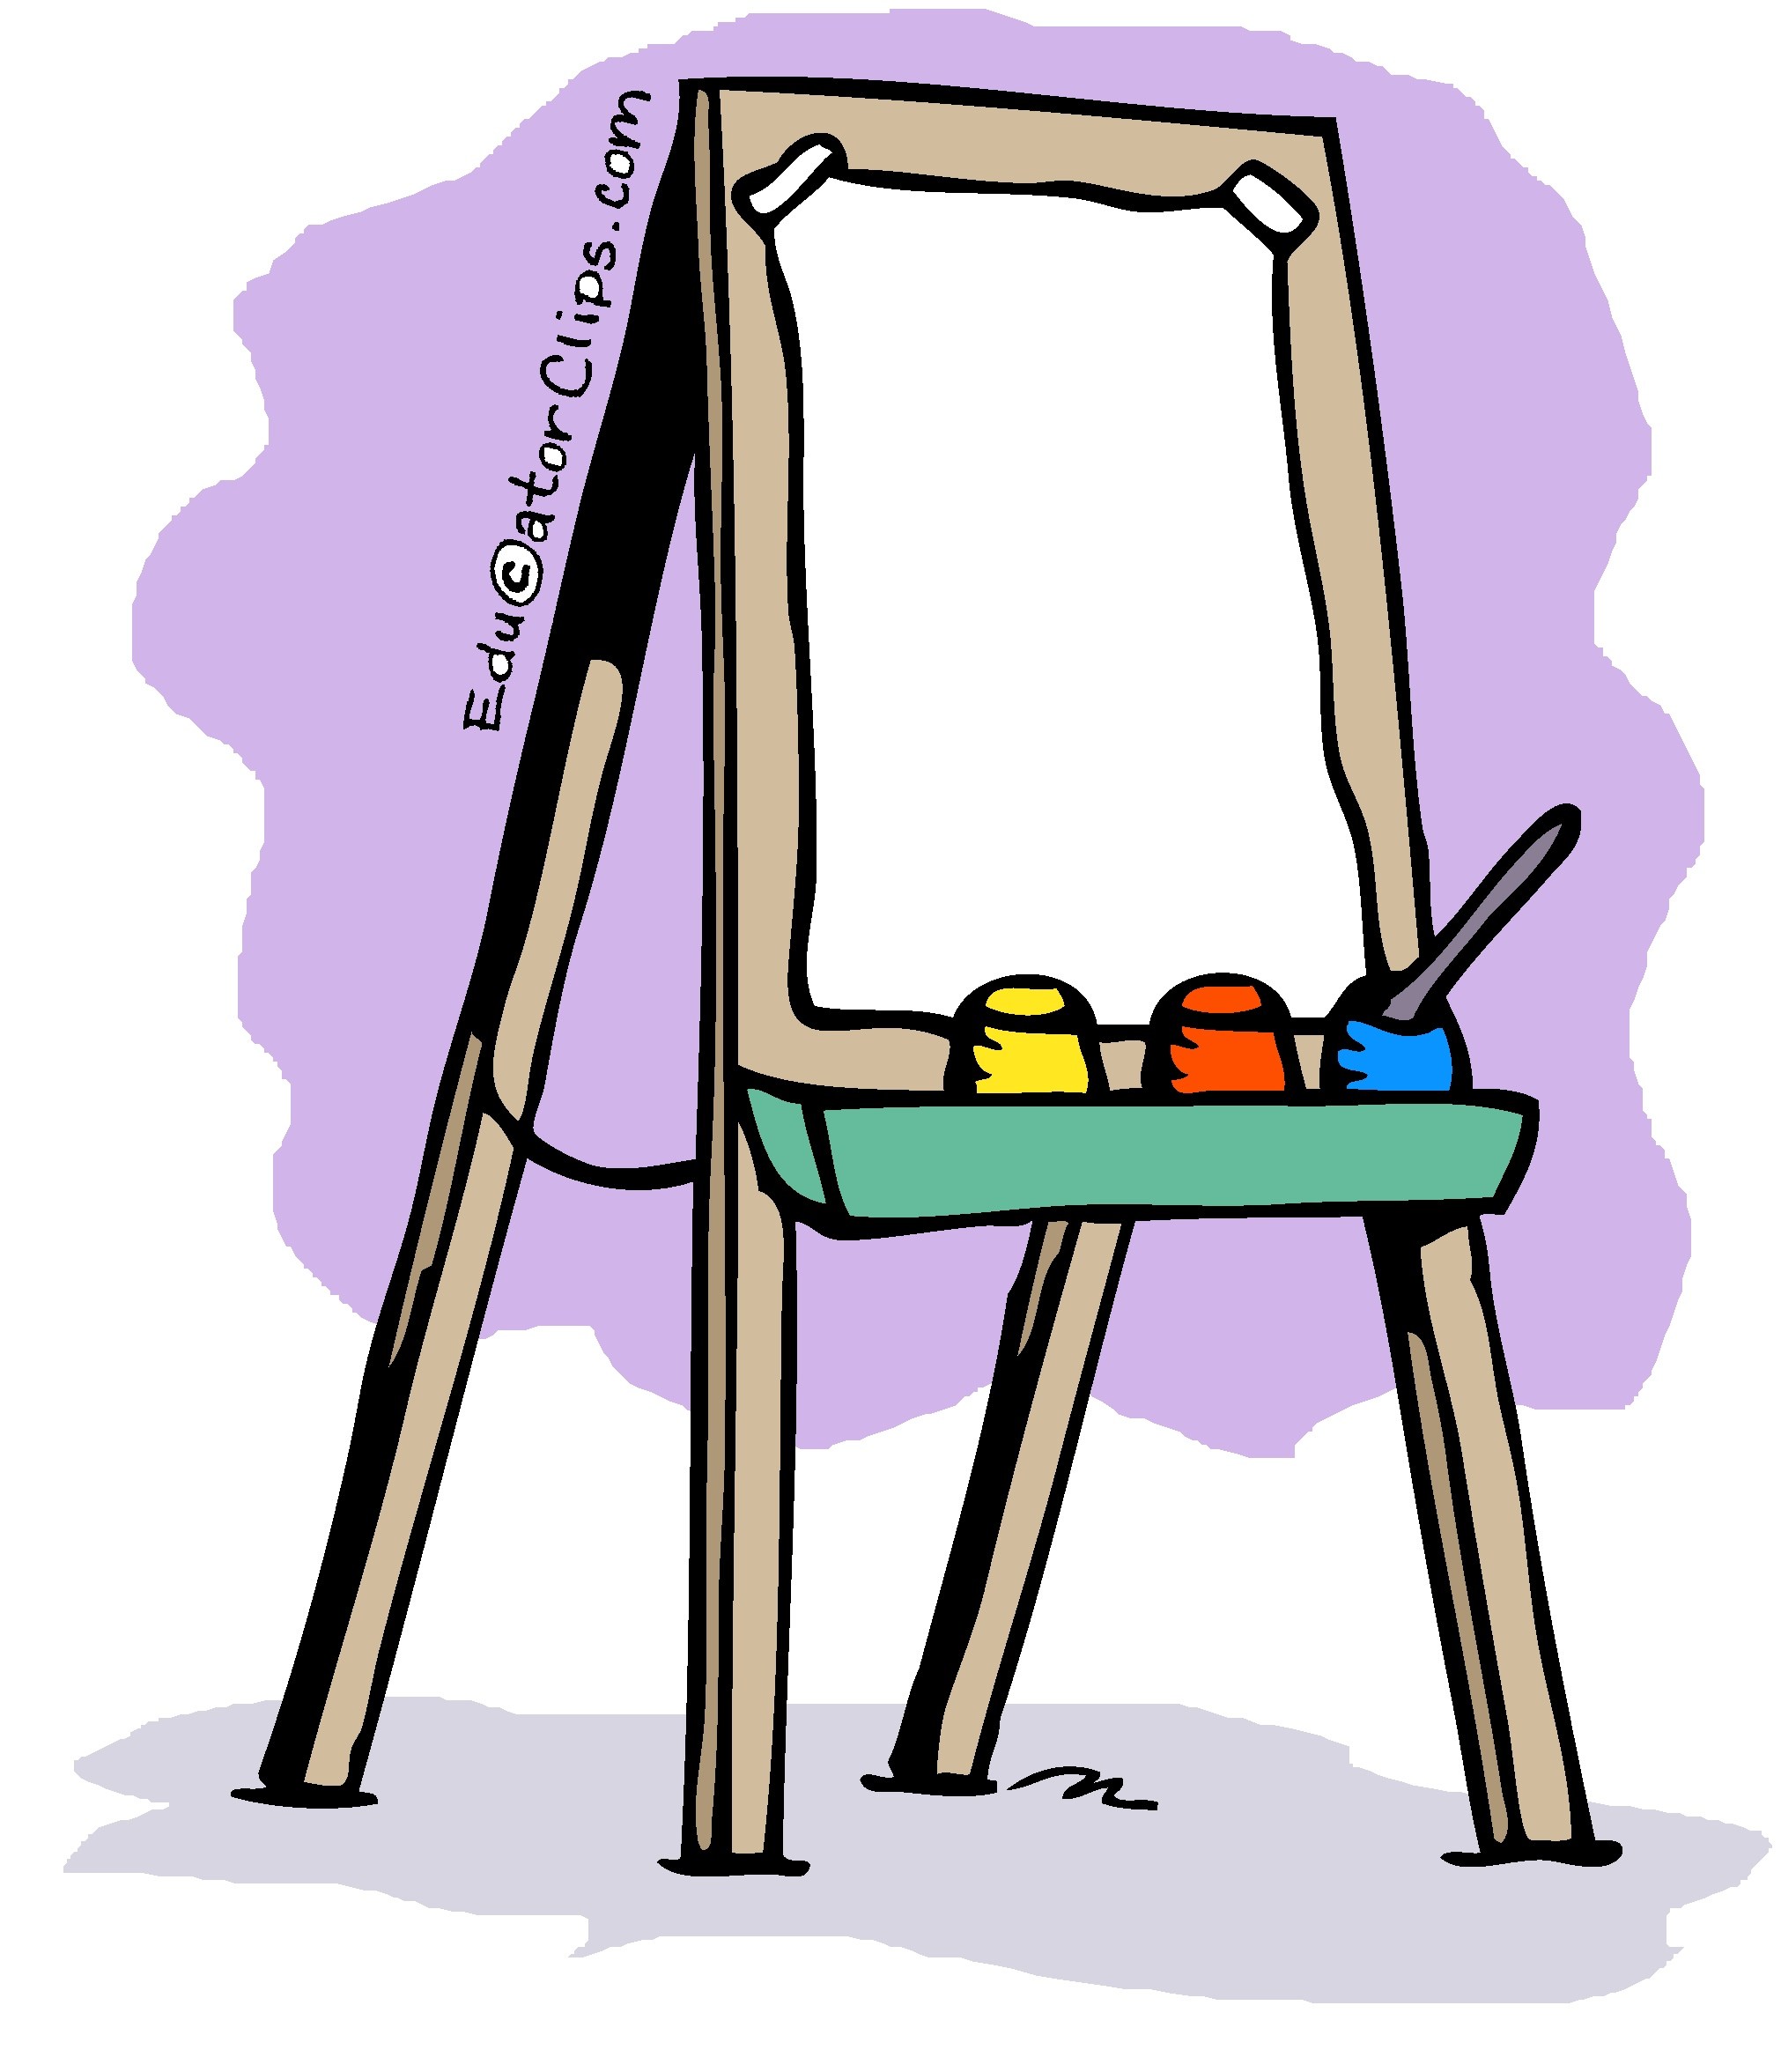 Easel clipart artist easel, Easel artist easel Transparent FREE for